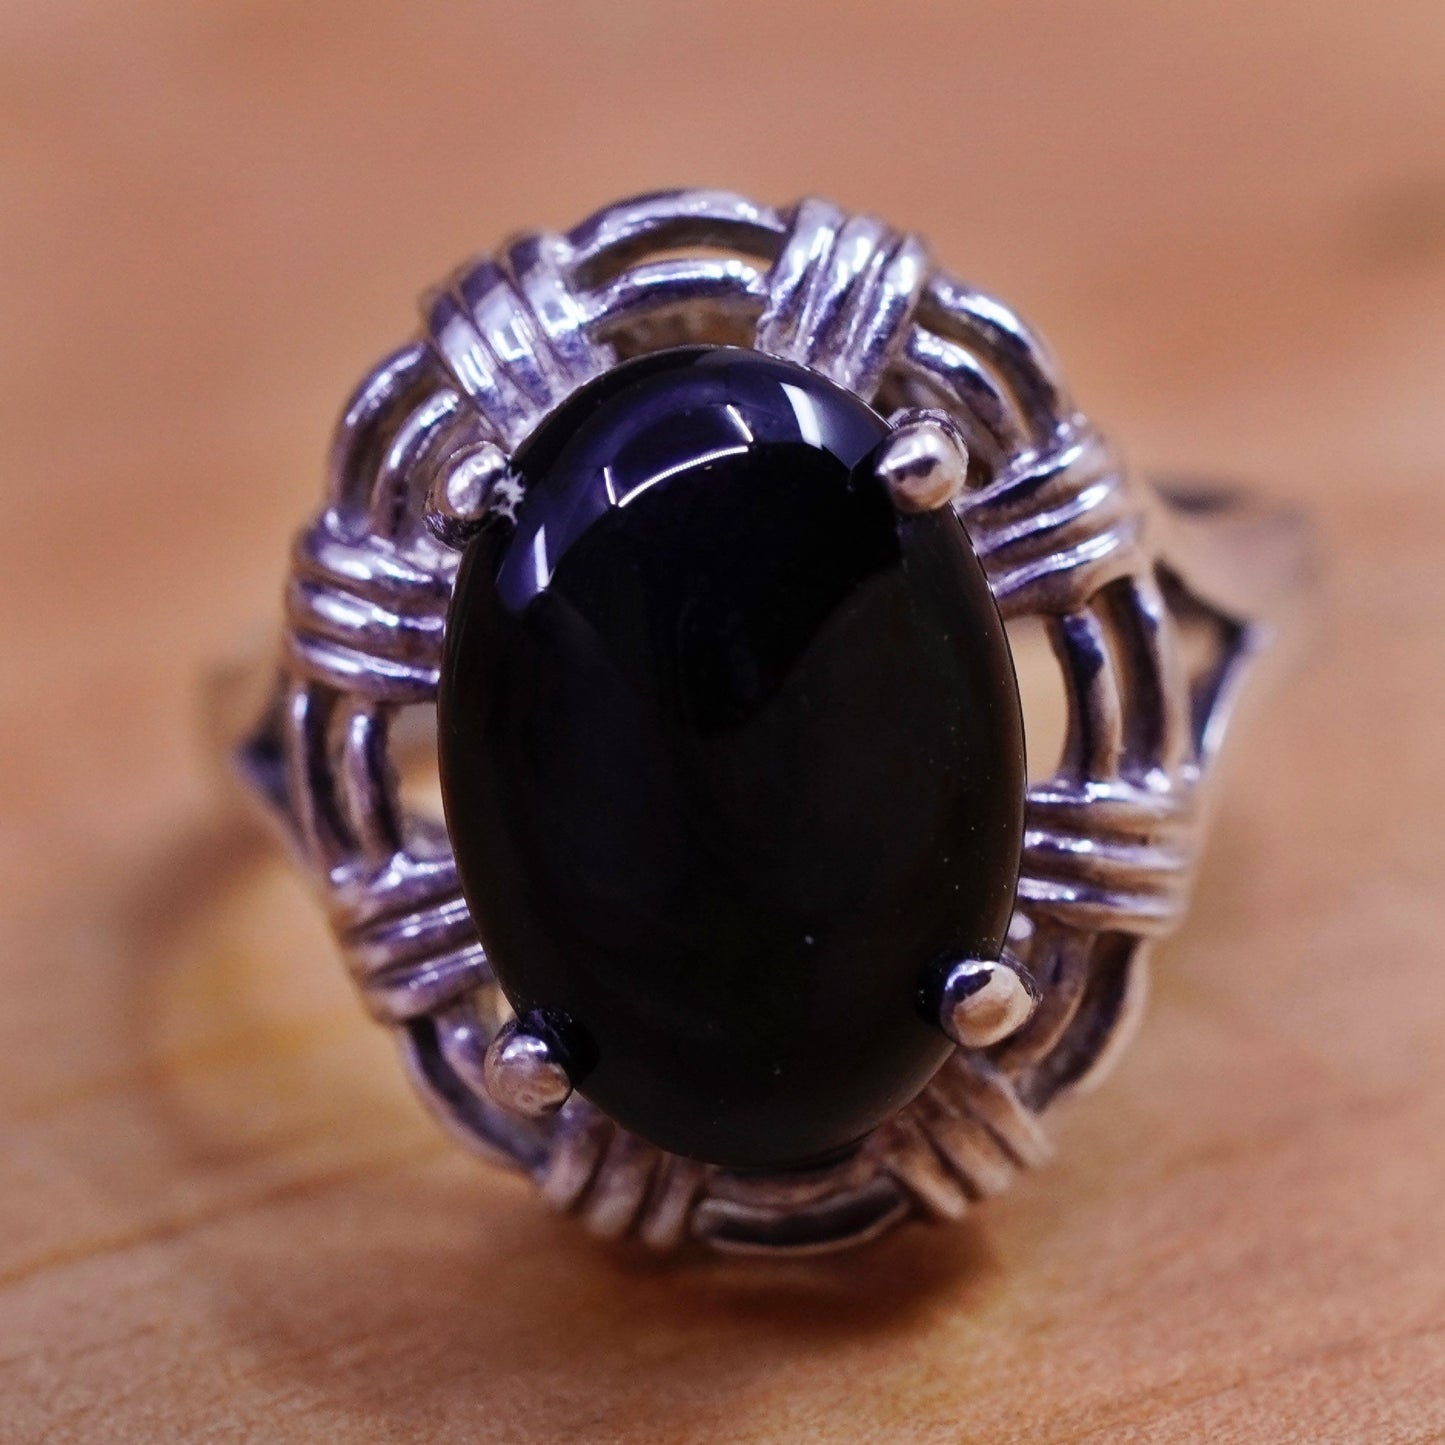 Size 7, vintage Sterling 925 silver handmade ring with oval obsidian